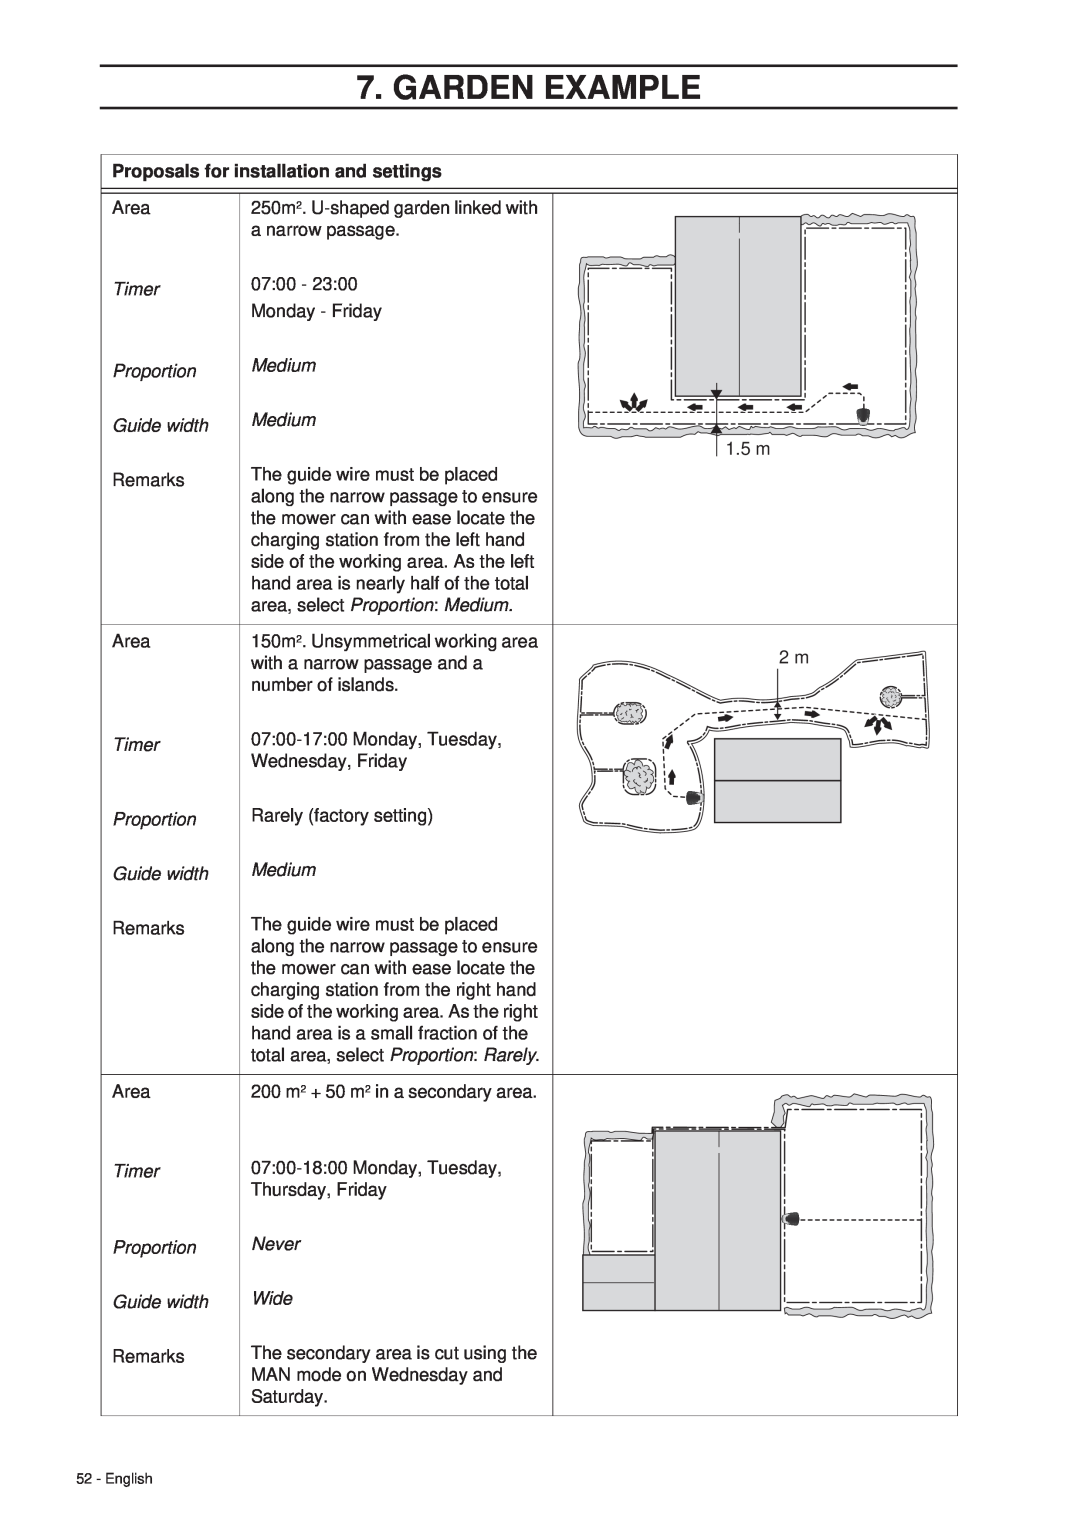 Husqvarna 305 manual Garden Example, Proposals for installation and settings, Area 